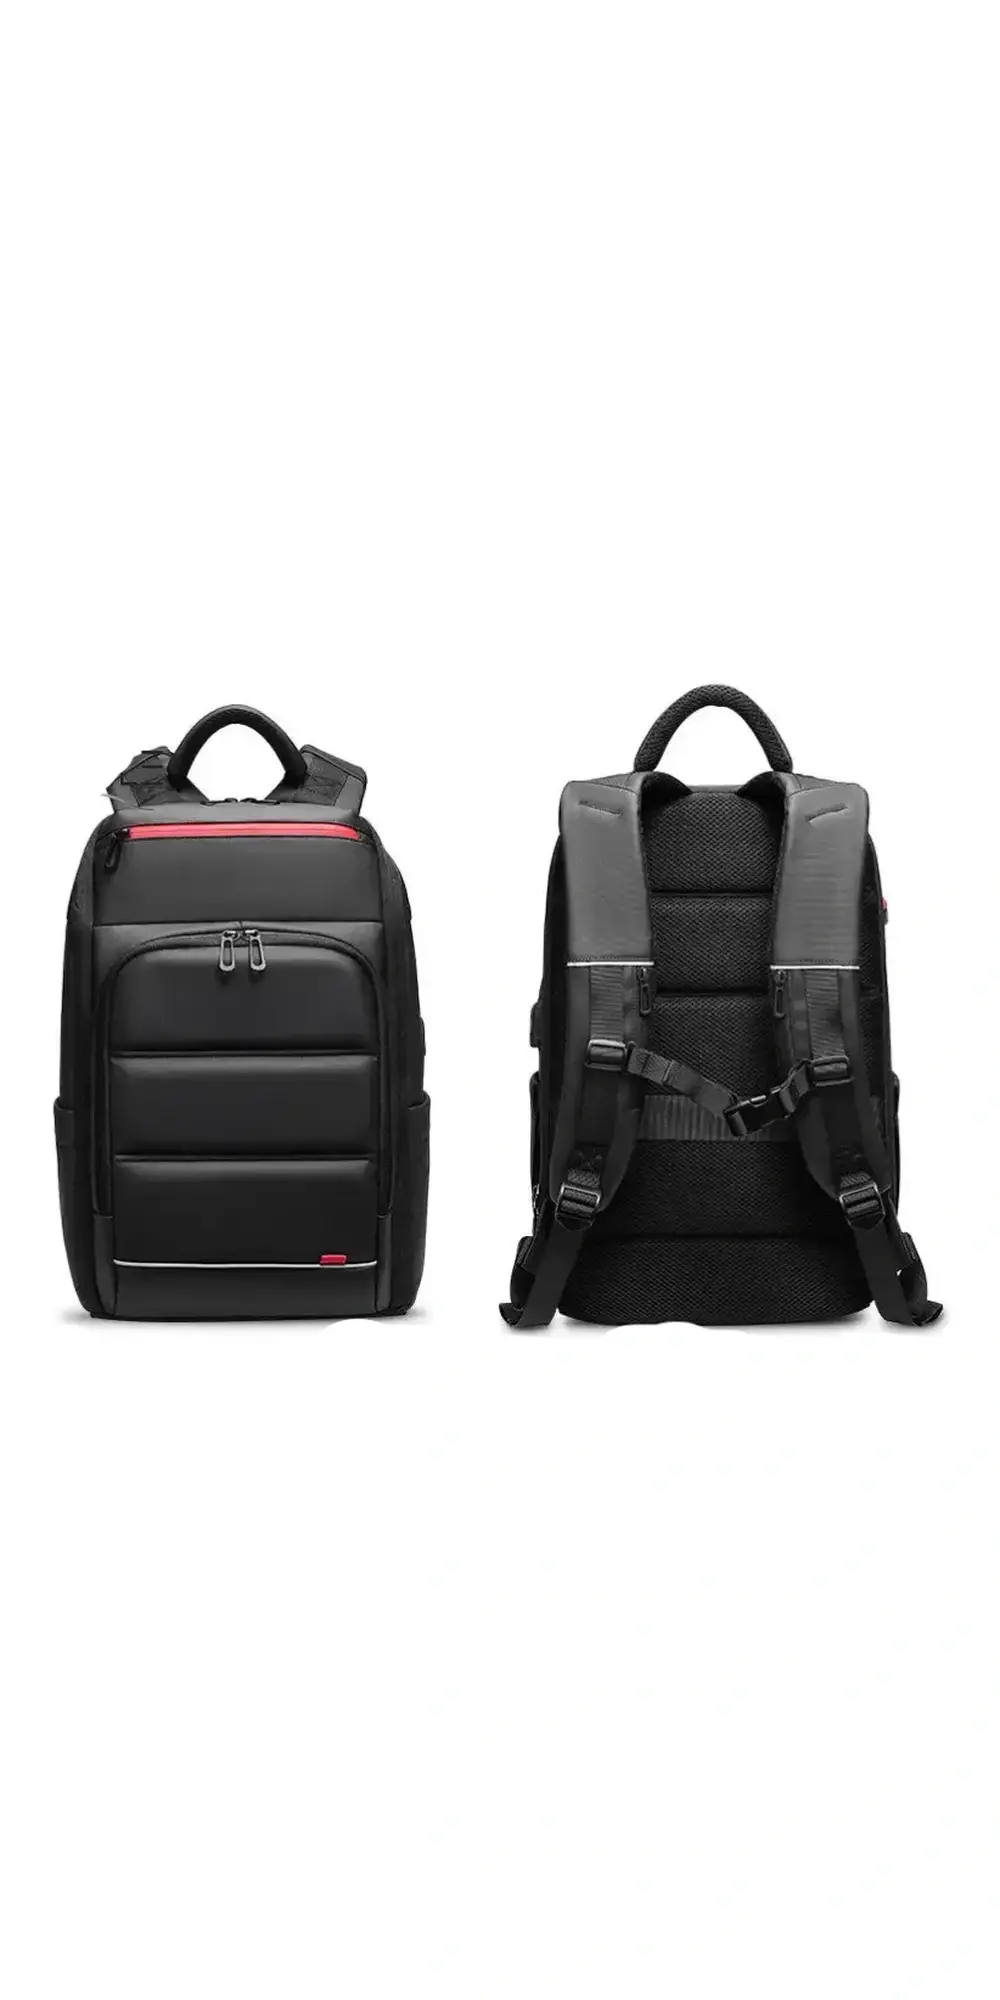 Waterproof Backpack with Multifunctional External USB Charge